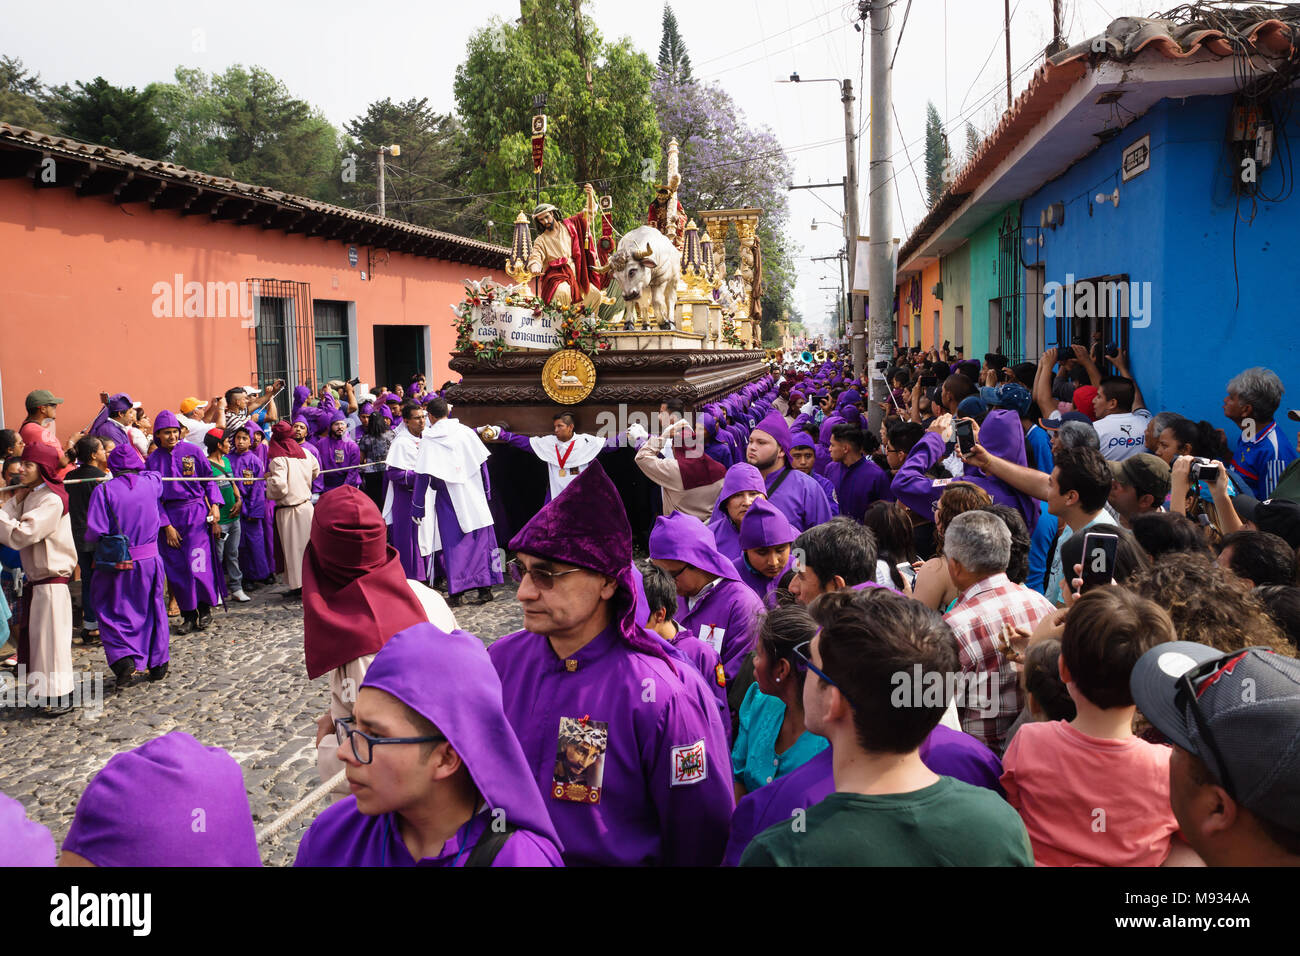 Visitors watching purple robed men carrying a float with Christ and a cross at the procession of San Bartolome de Becerra, Antigua, Guatemala Stock Photo